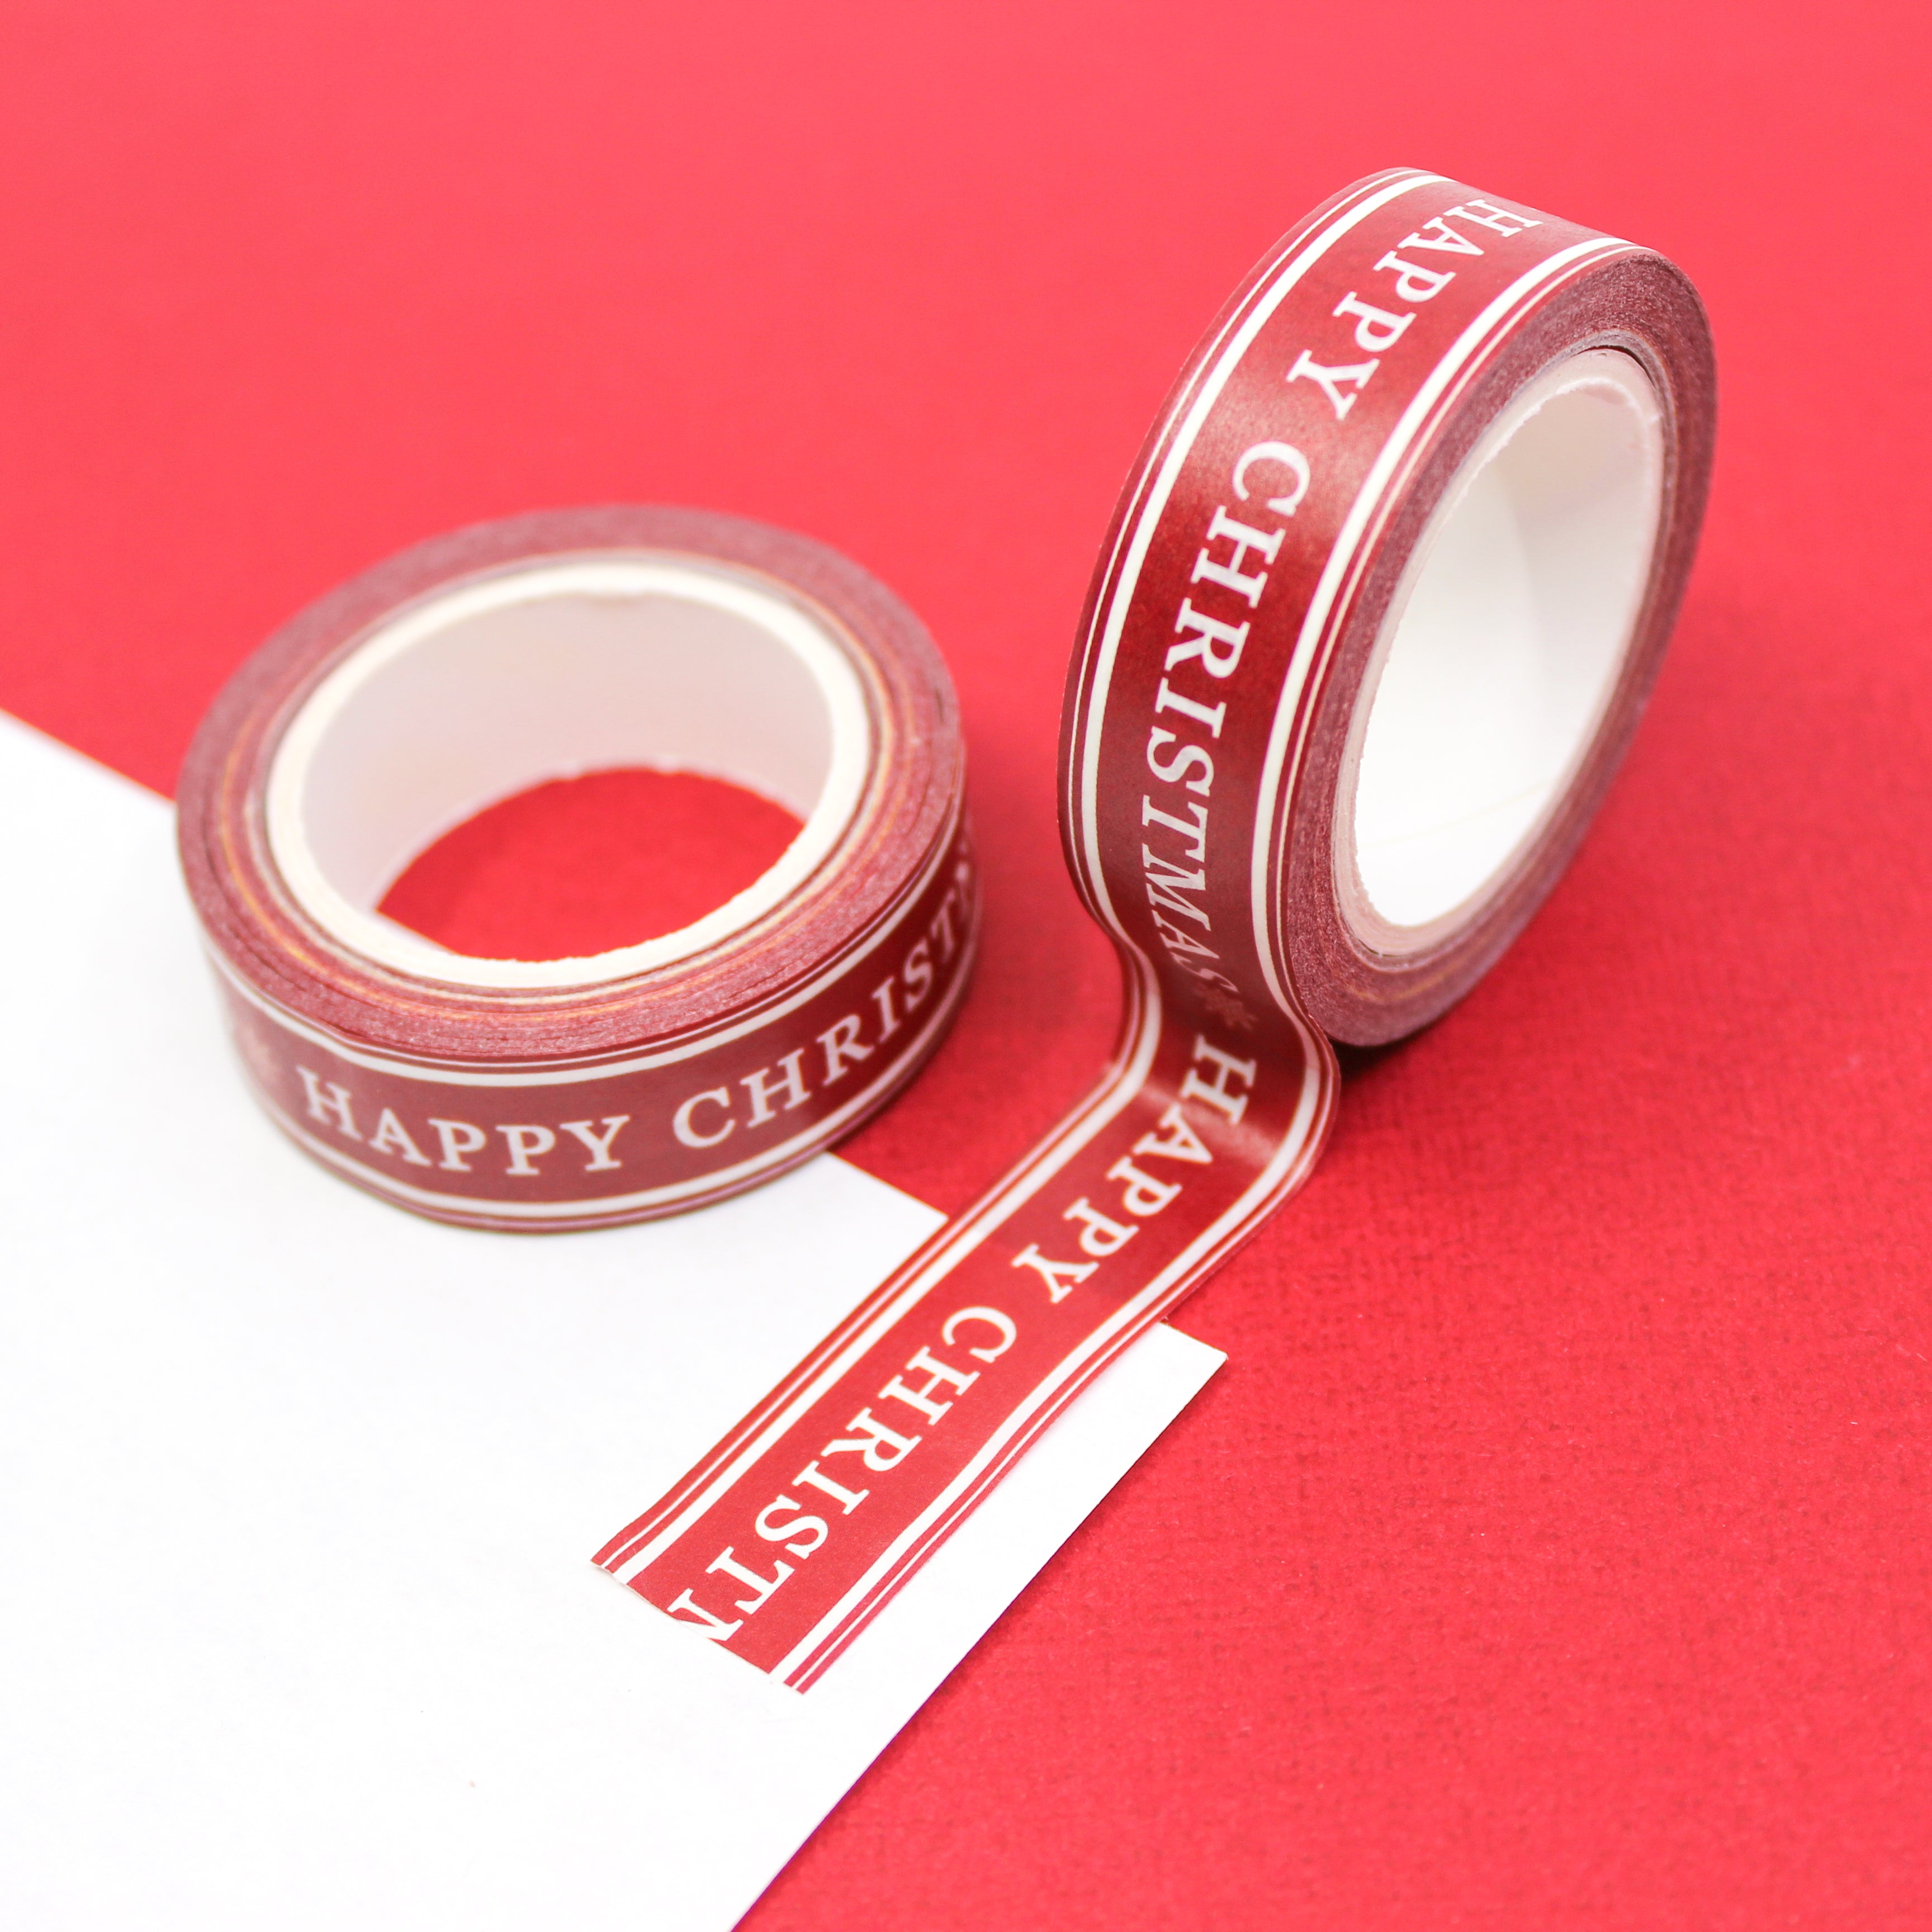 This is a Happy Christmas greetings view themed washi tape from BBB Supplies Craft Shop